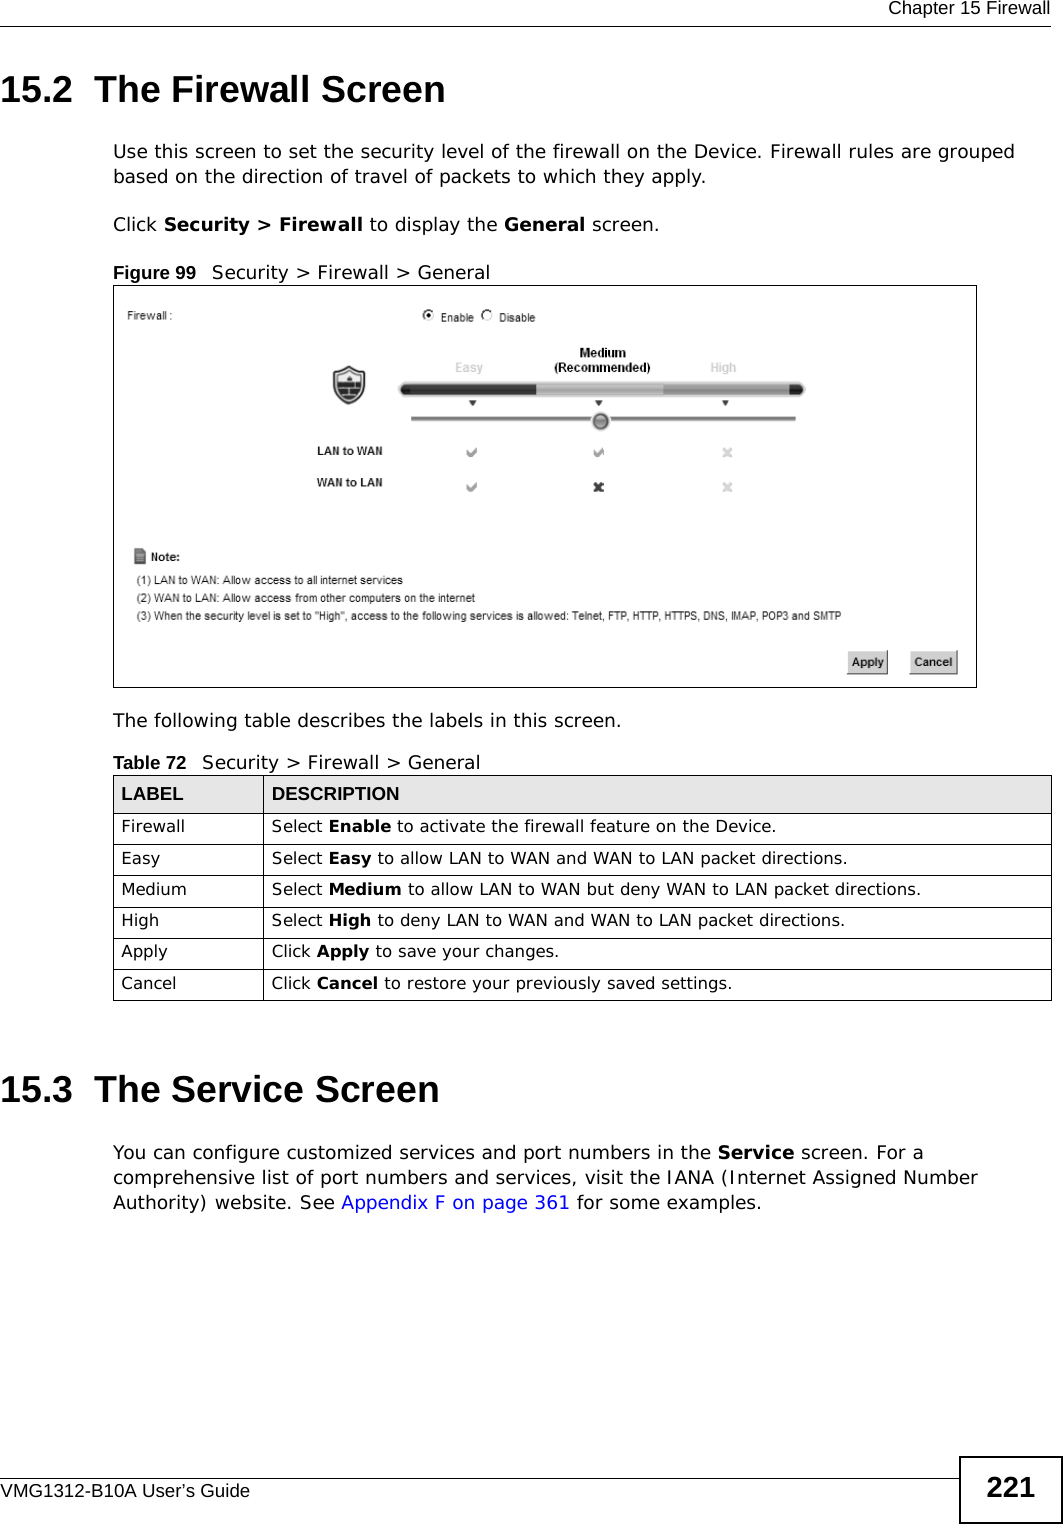  Chapter 15 FirewallVMG1312-B10A User’s Guide 22115.2  The Firewall ScreenUse this screen to set the security level of the firewall on the Device. Firewall rules are grouped based on the direction of travel of packets to which they apply. Click Security &gt; Firewall to display the General screen. Figure 99   Security &gt; Firewall &gt; GeneralThe following table describes the labels in this screen.15.3  The Service Screen You can configure customized services and port numbers in the Service screen. For a comprehensive list of port numbers and services, visit the IANA (Internet Assigned Number Authority) website. See Appendix F on page 361 for some examples. Table 72   Security &gt; Firewall &gt; GeneralLABEL DESCRIPTIONFirewall Select Enable to activate the firewall feature on the Device.Easy Select Easy to allow LAN to WAN and WAN to LAN packet directions.Medium Select Medium to allow LAN to WAN but deny WAN to LAN packet directions.High Select High to deny LAN to WAN and WAN to LAN packet directions.Apply Click Apply to save your changes.Cancel Click Cancel to restore your previously saved settings.